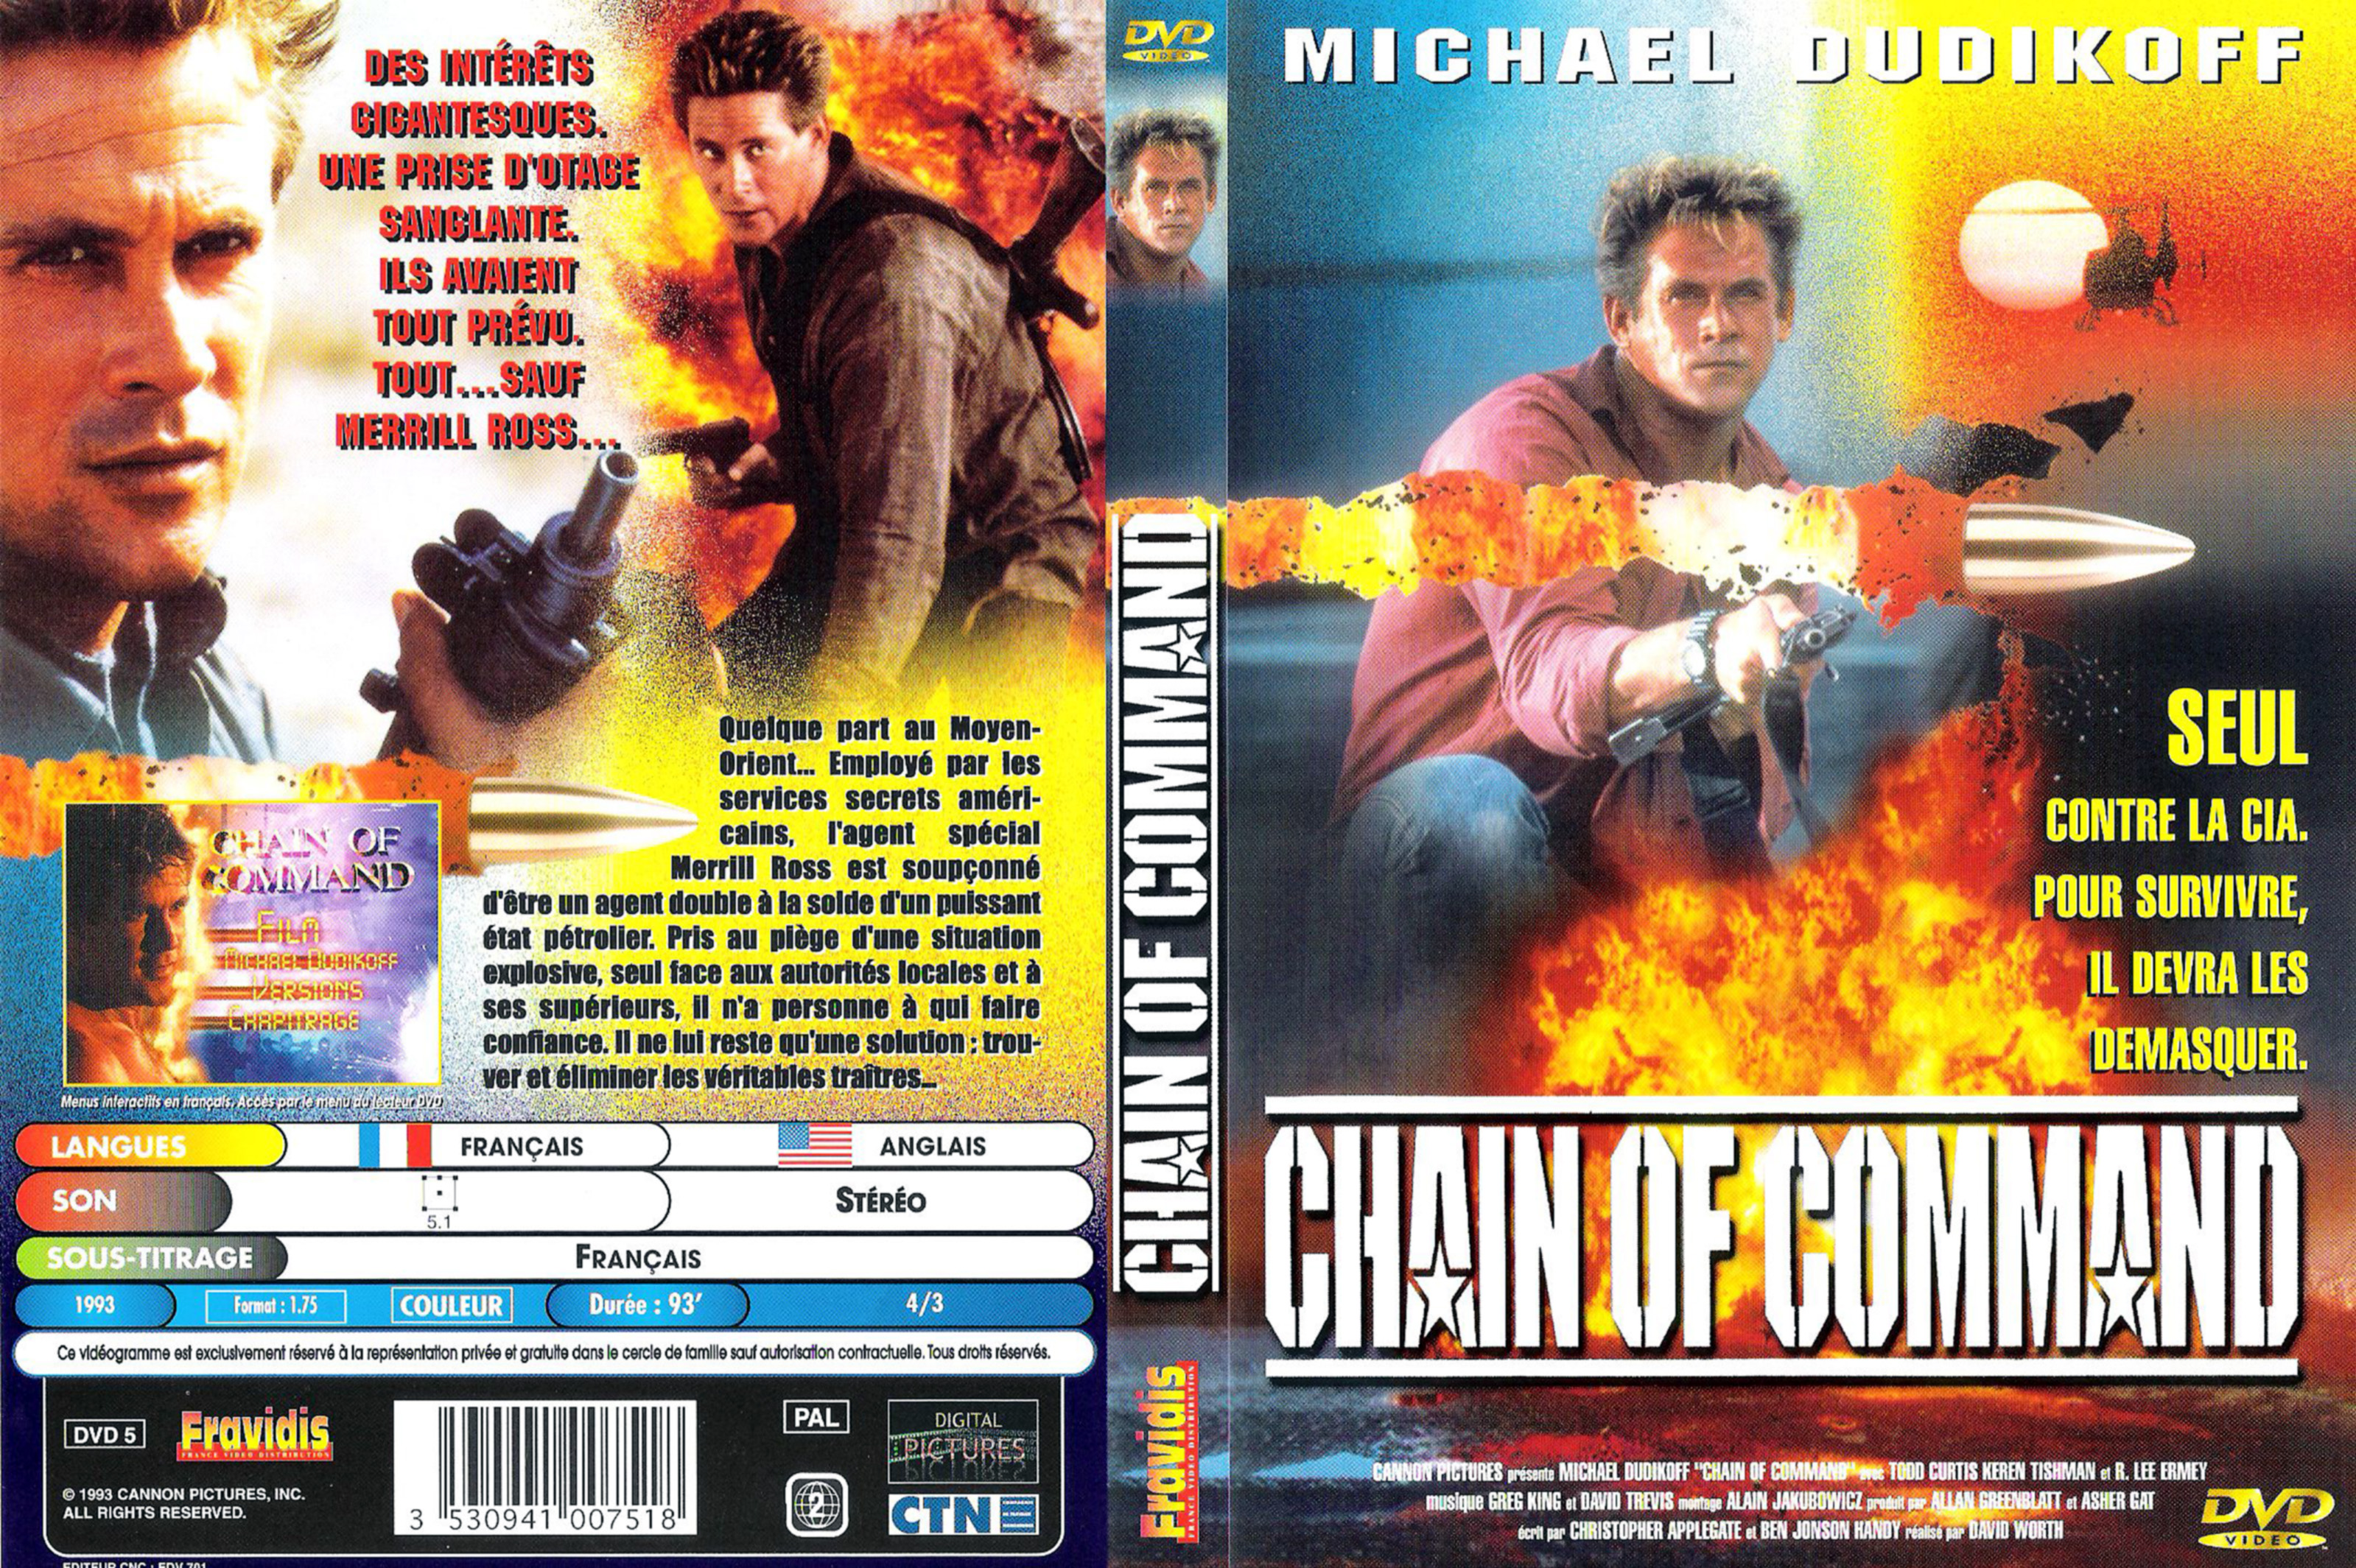 Jaquette DVD Chain of command